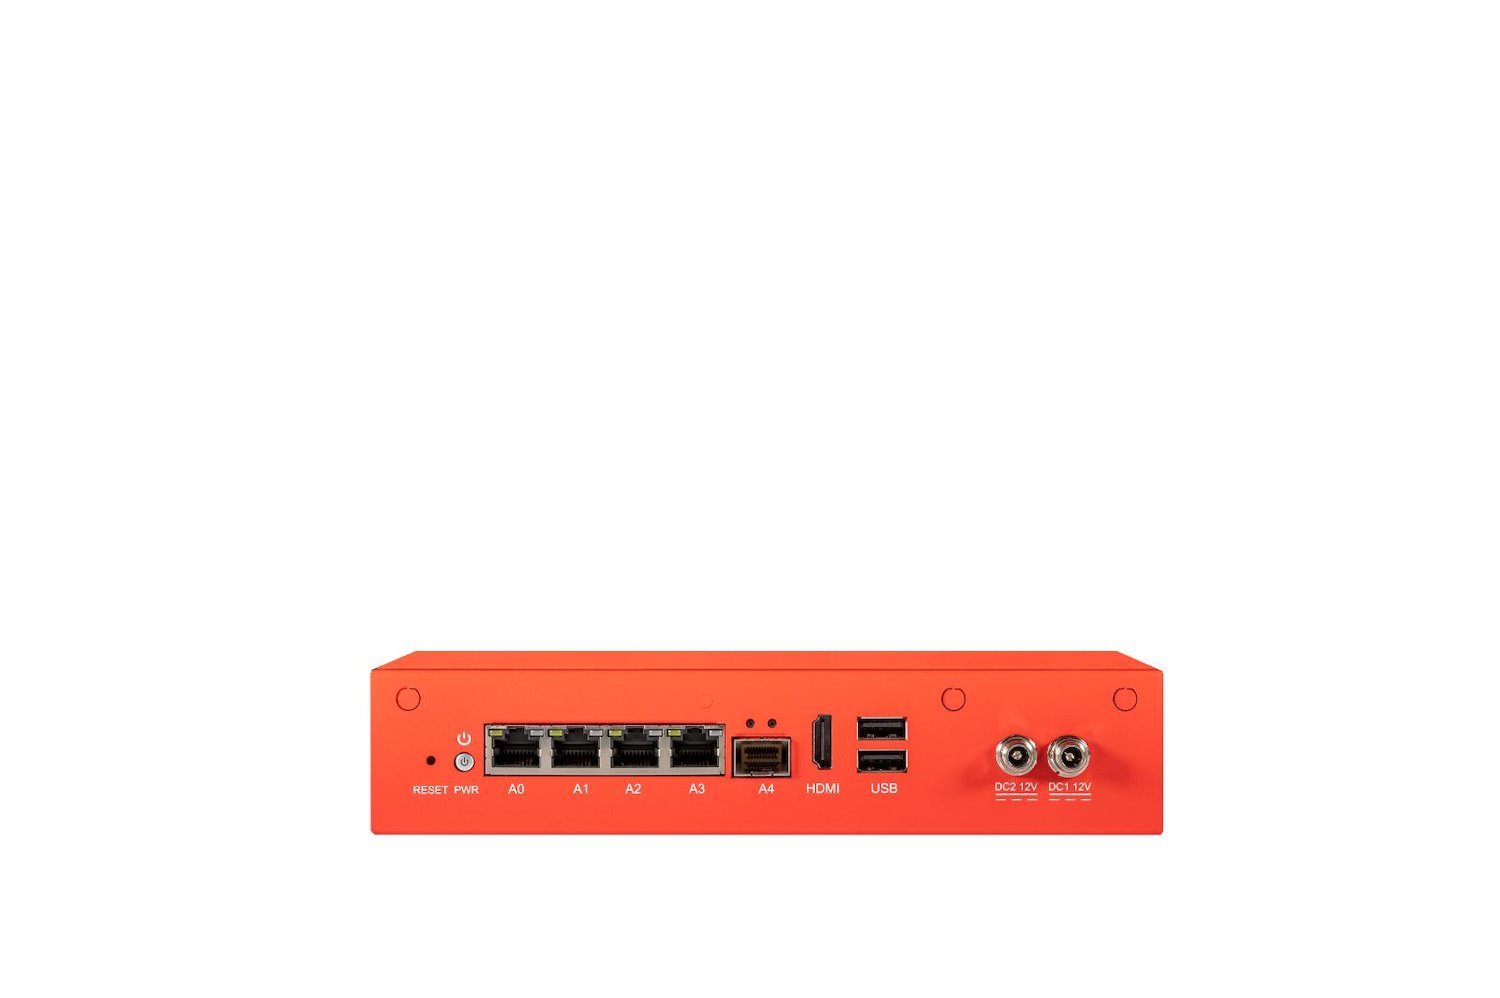 Securepoint RC200 G5 Security Utm Appliance (Securepoint Firewall RC200 G5)